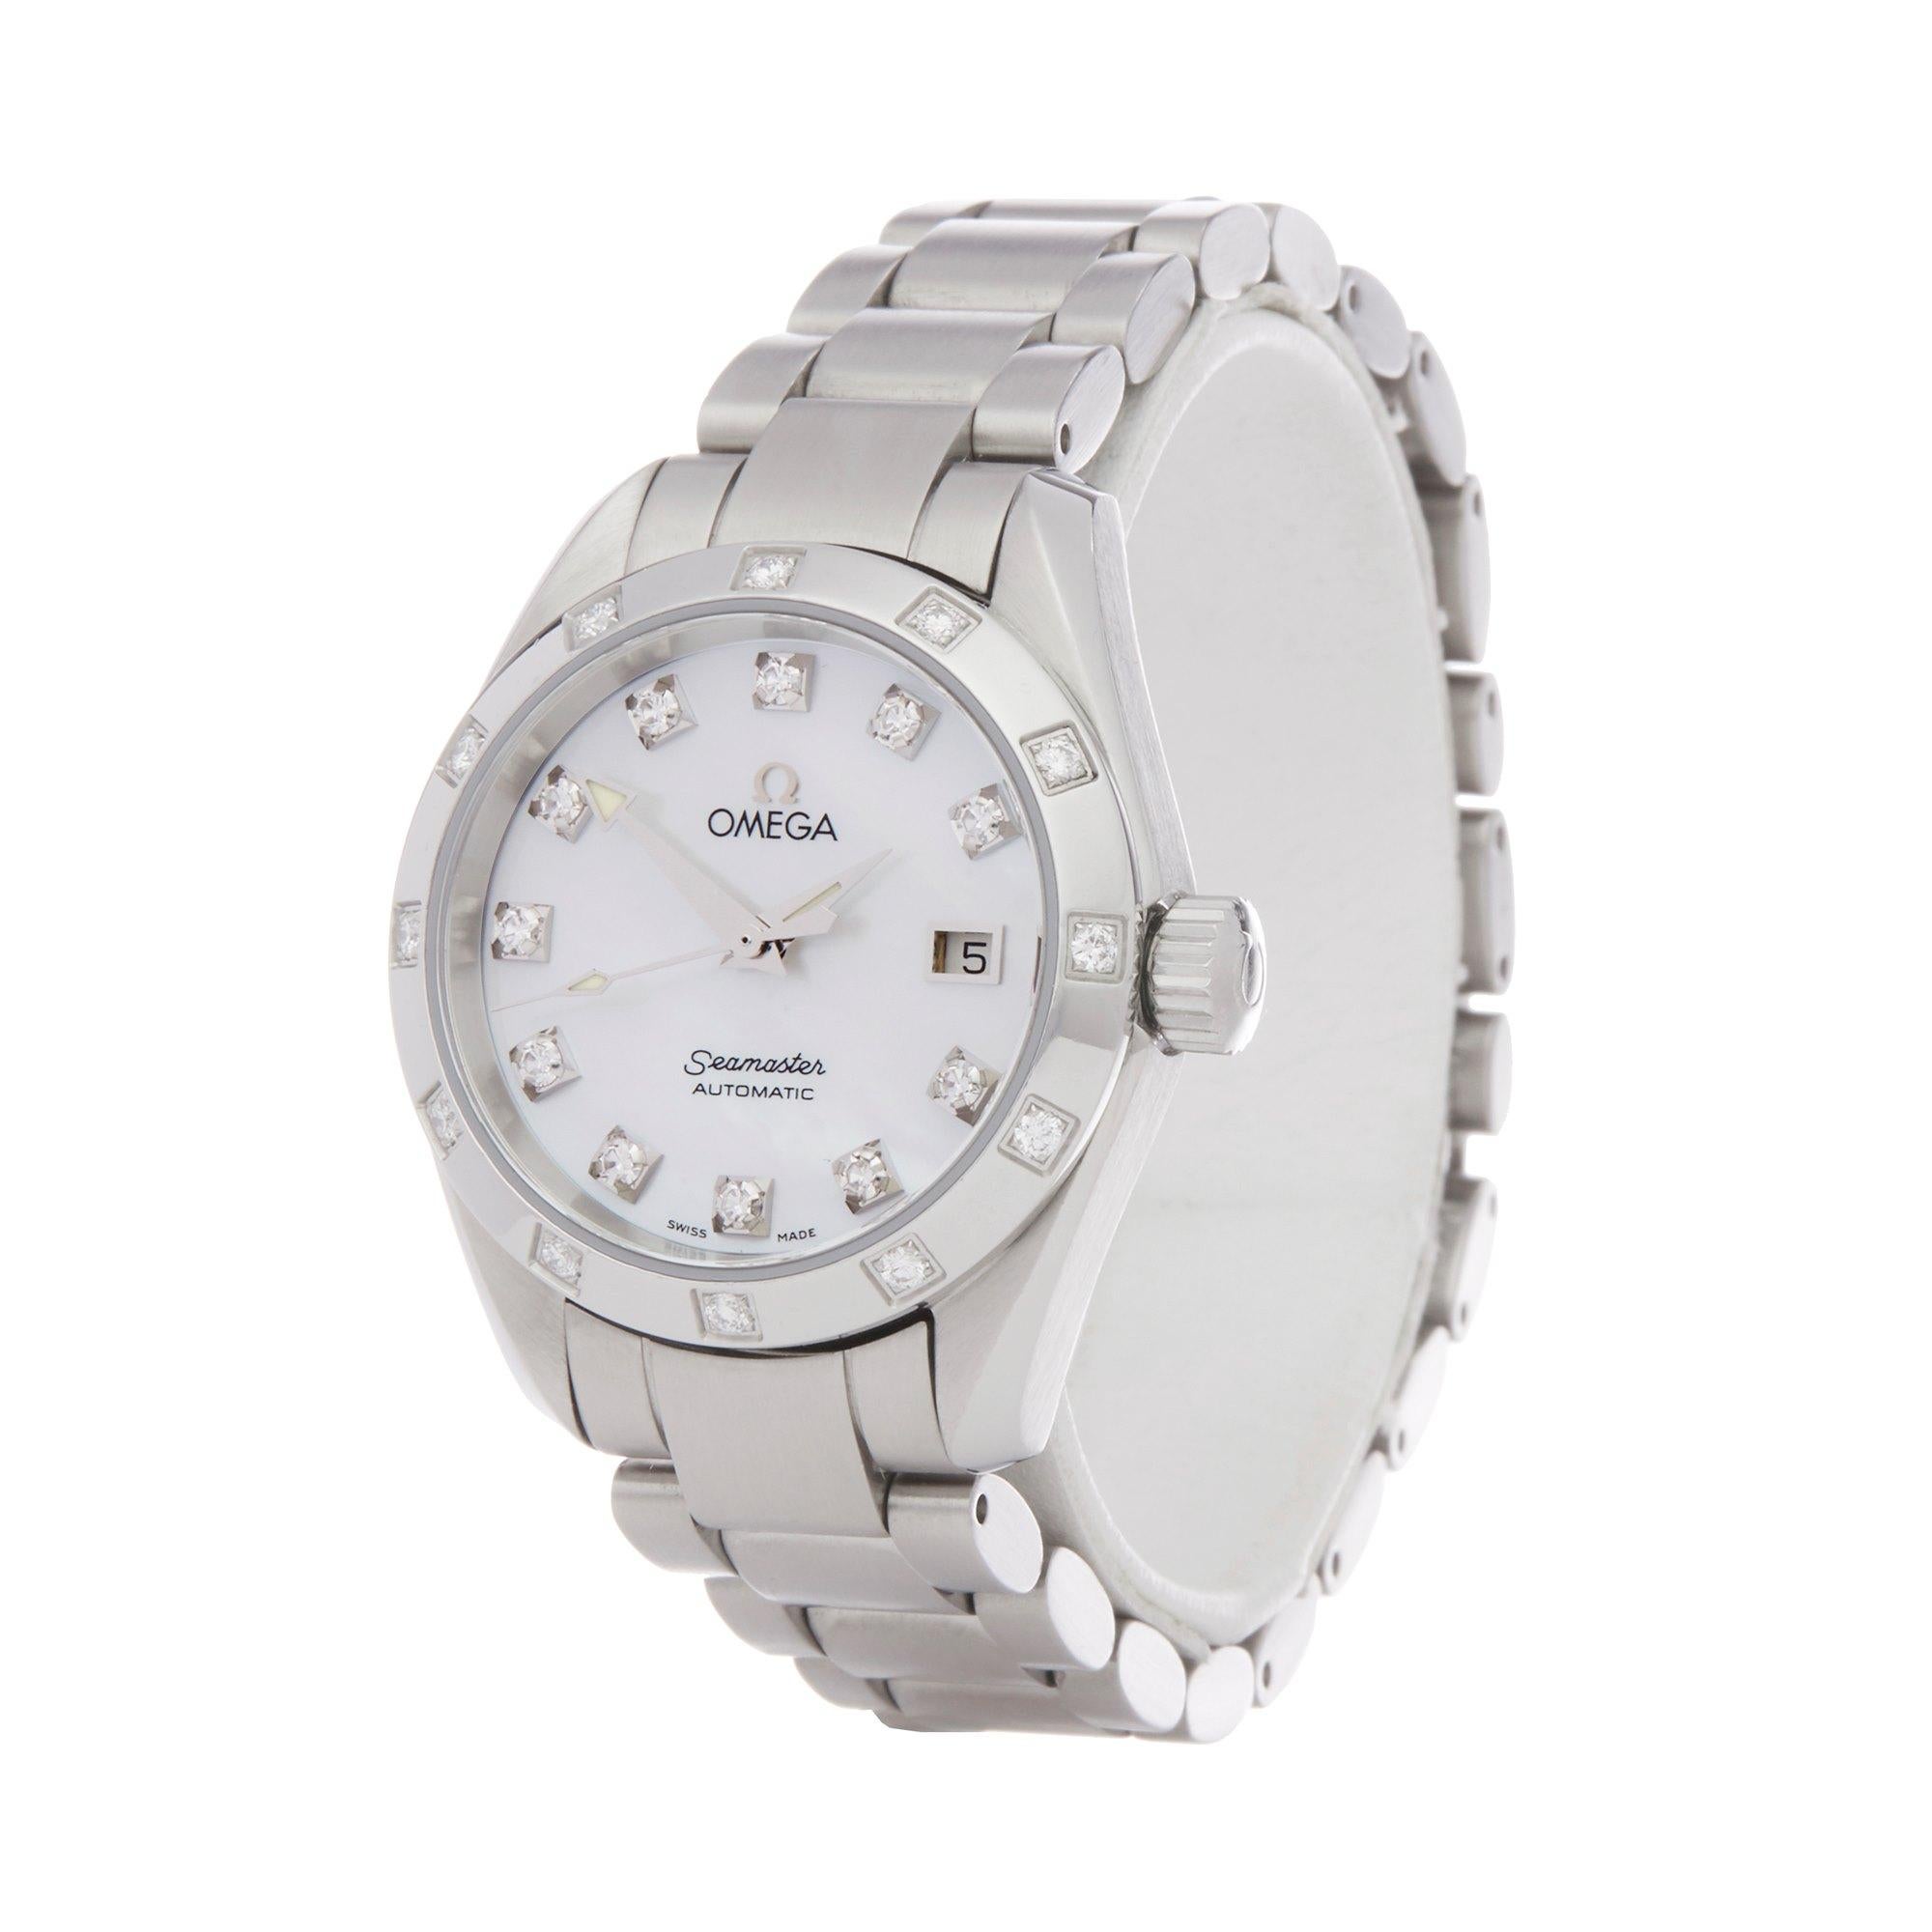 Xupes Reference: W007696
Manufacturer: Omega
Model: Seamaster
Model Variant: 0
Model Number: 25647500
Age: 2000
Gender: Ladies
Complete With: Omega Box, Manual &Guarantee
Dial: Mother of Pearl With Diamond Markers
Glass: Sapphire Crystal
Case Size: